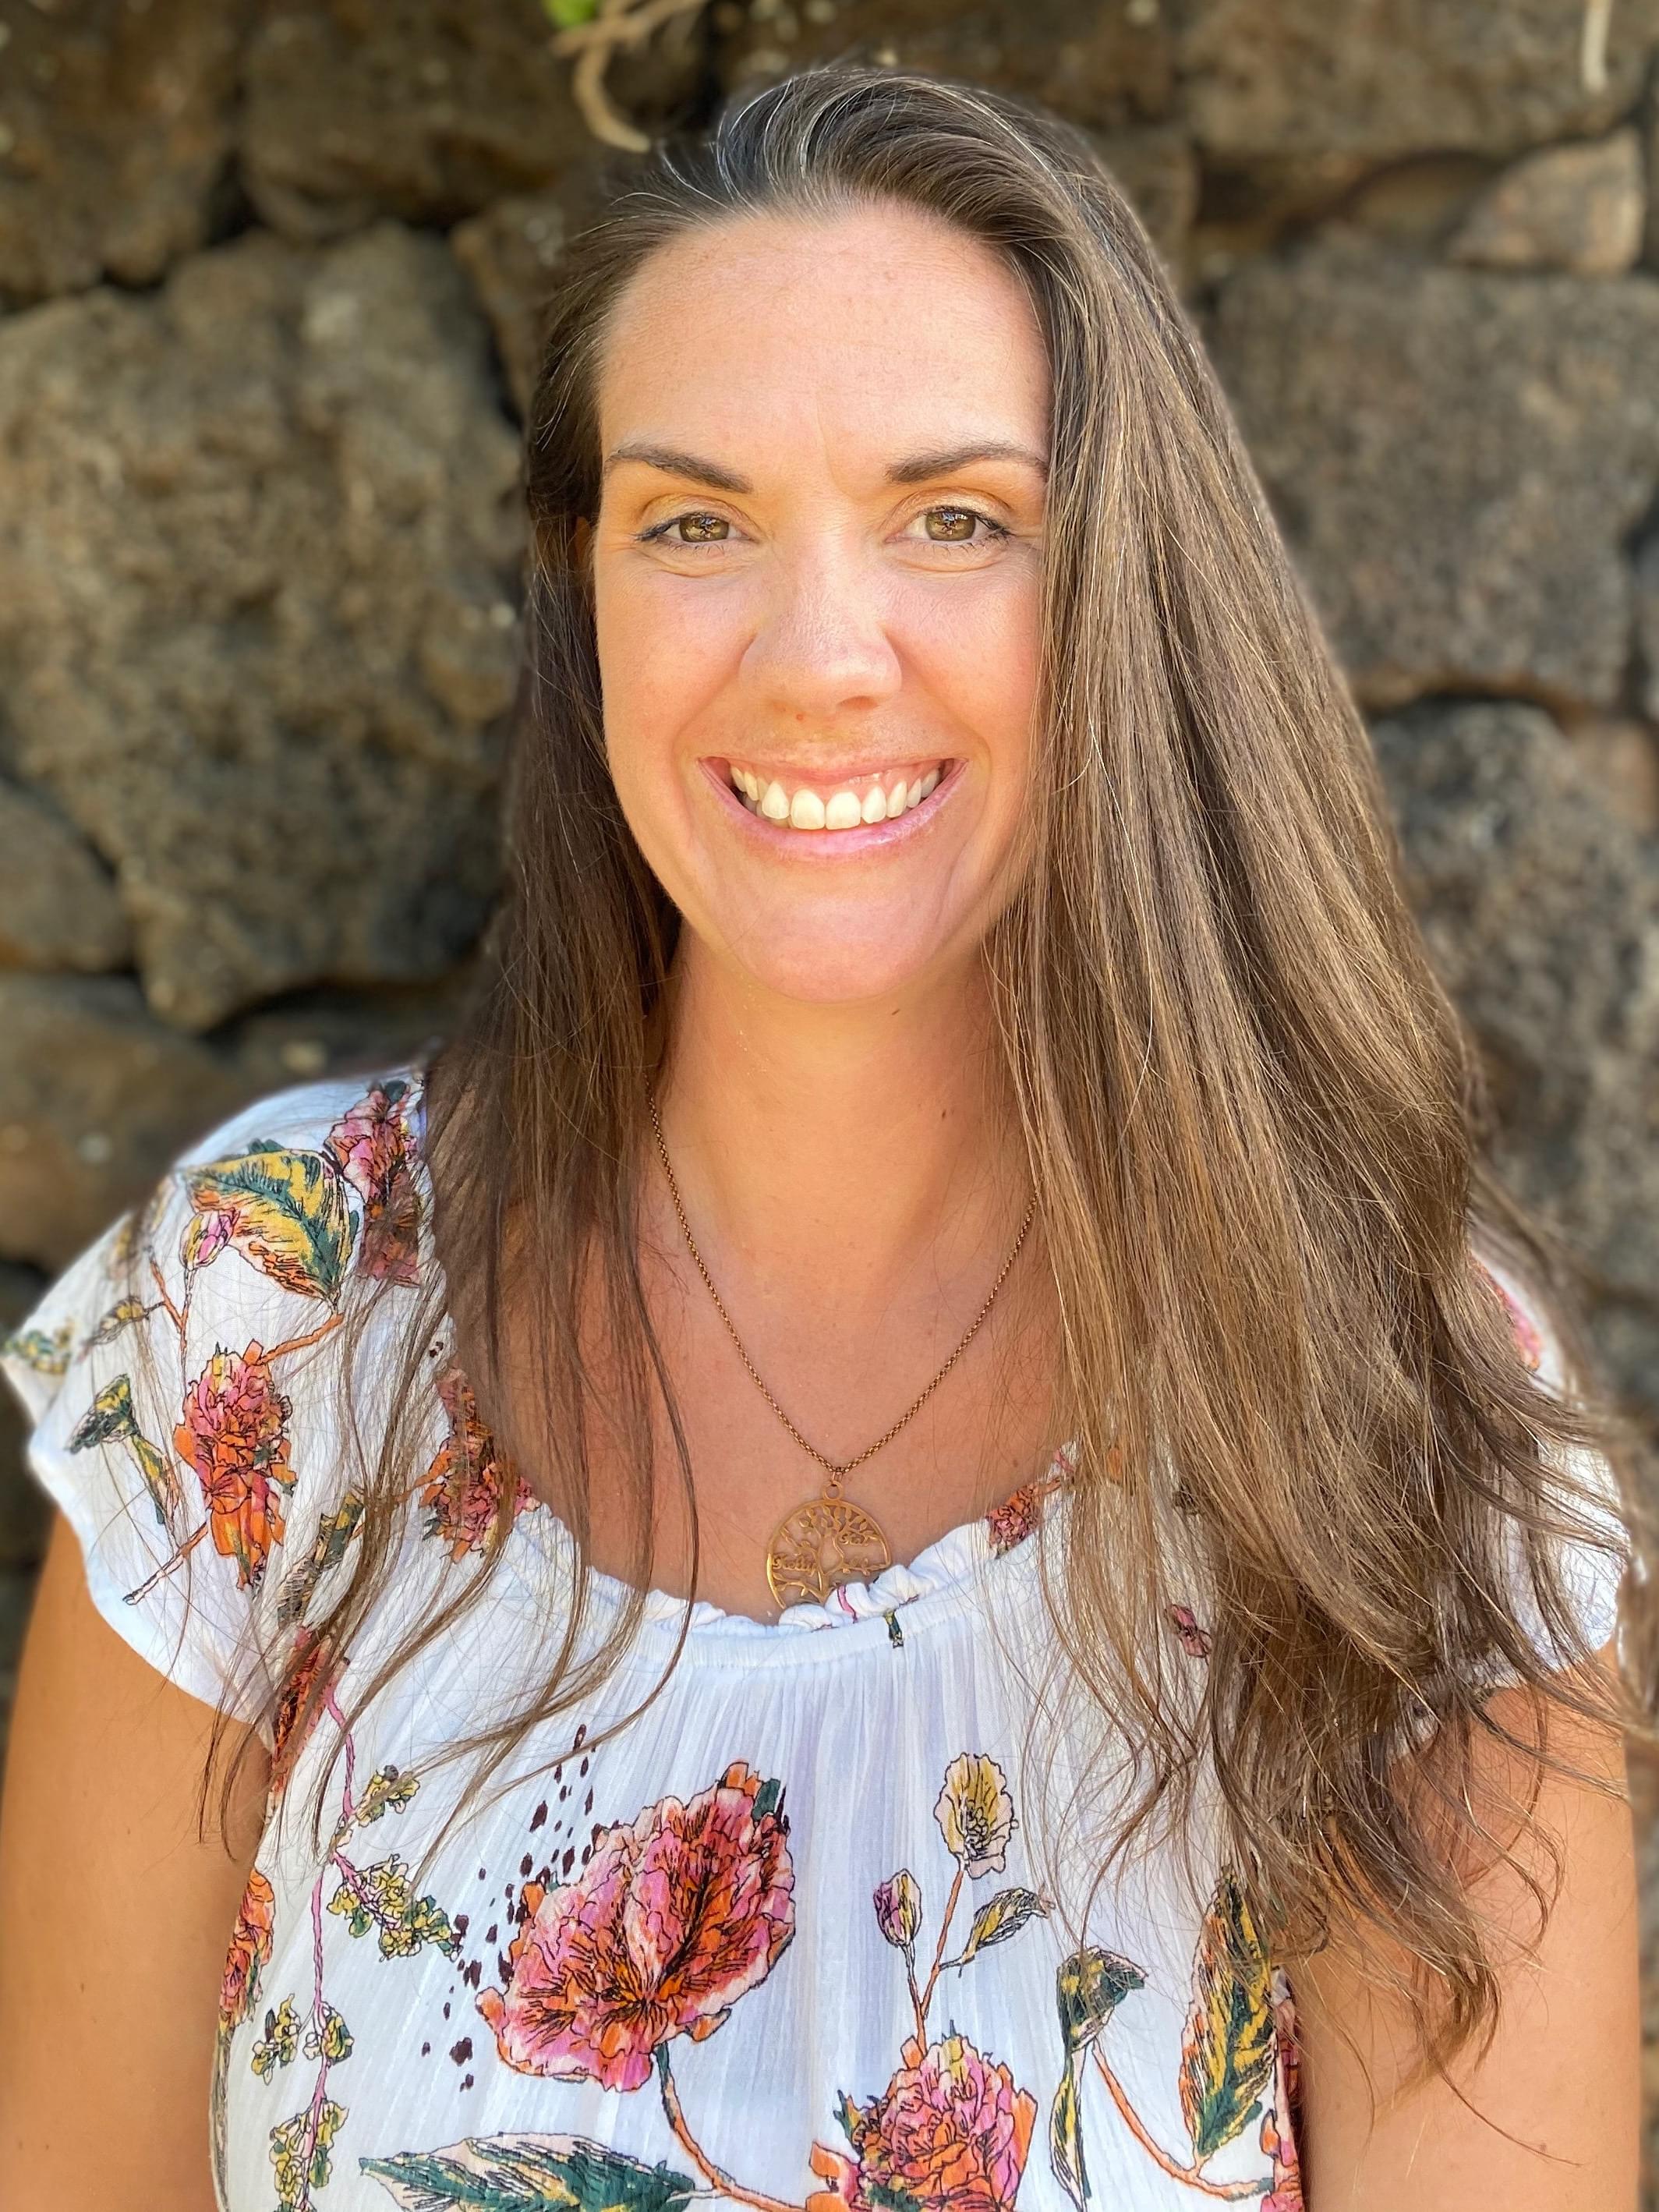 Dr. Kelly Robb of Hello Chiropractic in Lihue